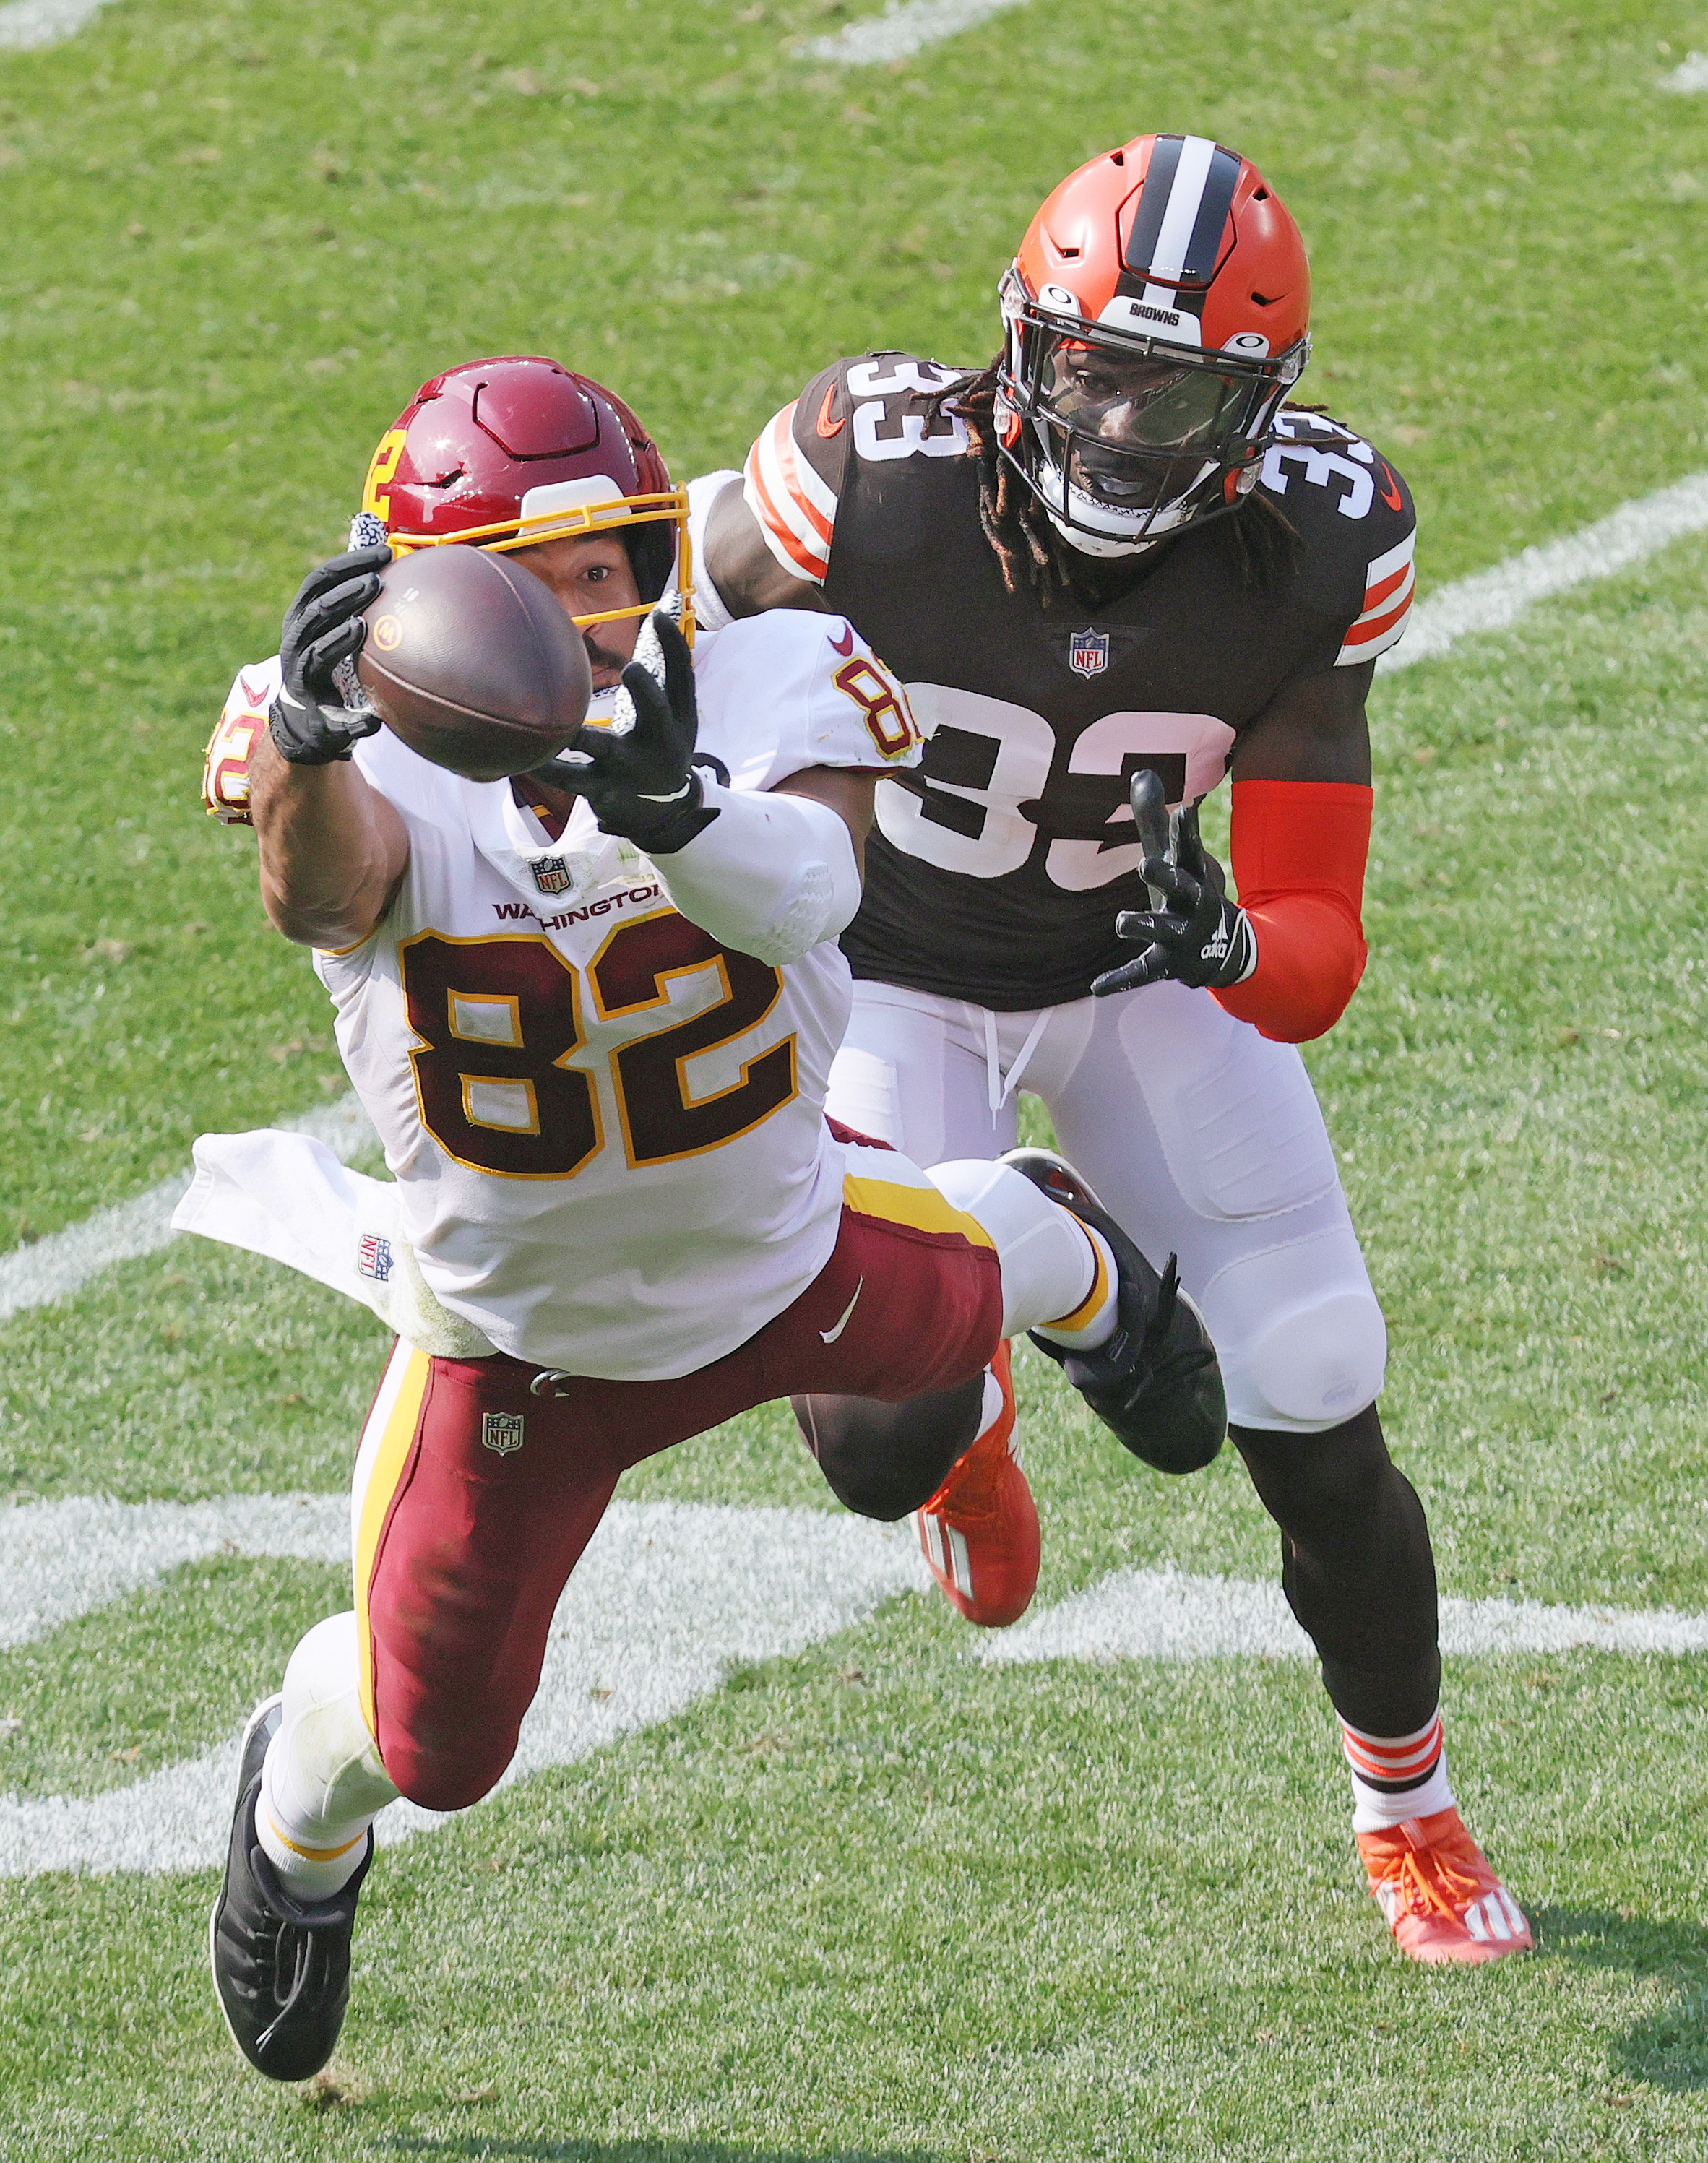 photographers' favorite photos from Browns win over